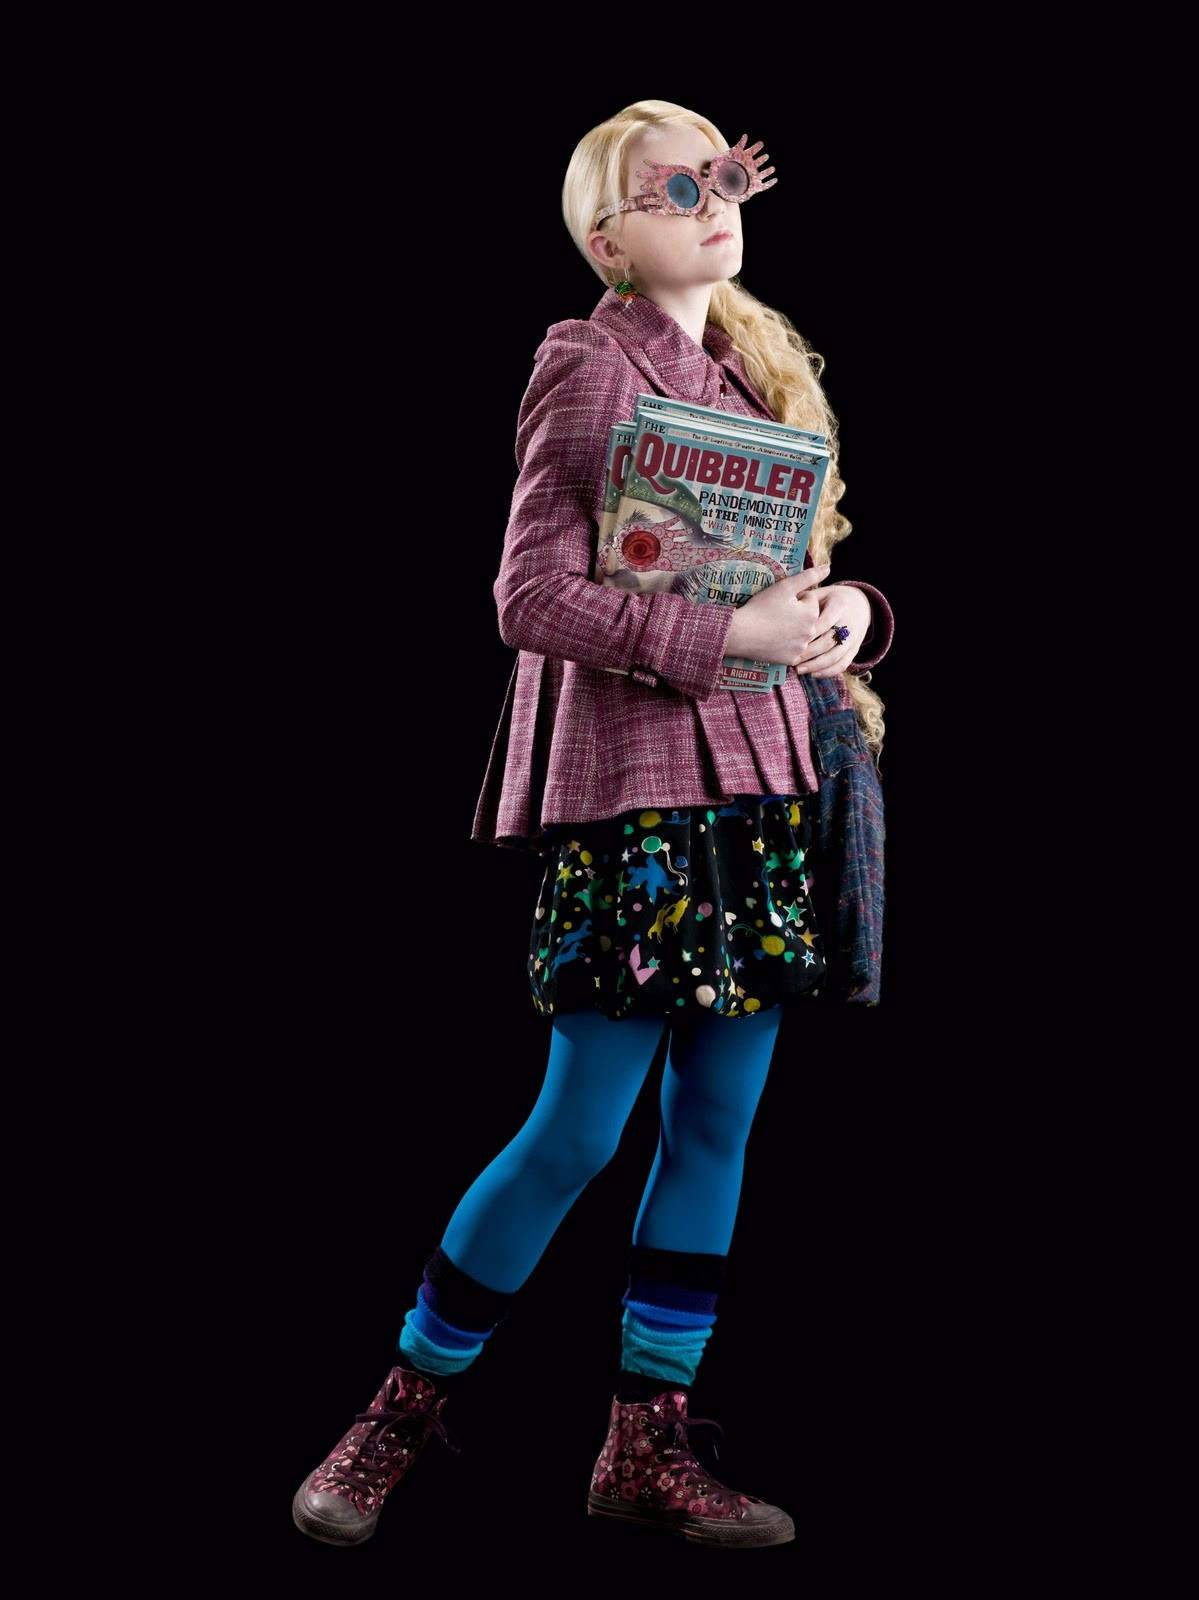 Luna Lovegood Costume DIY
 The 30 Day Harry Potter Challenge Day 11 What Character